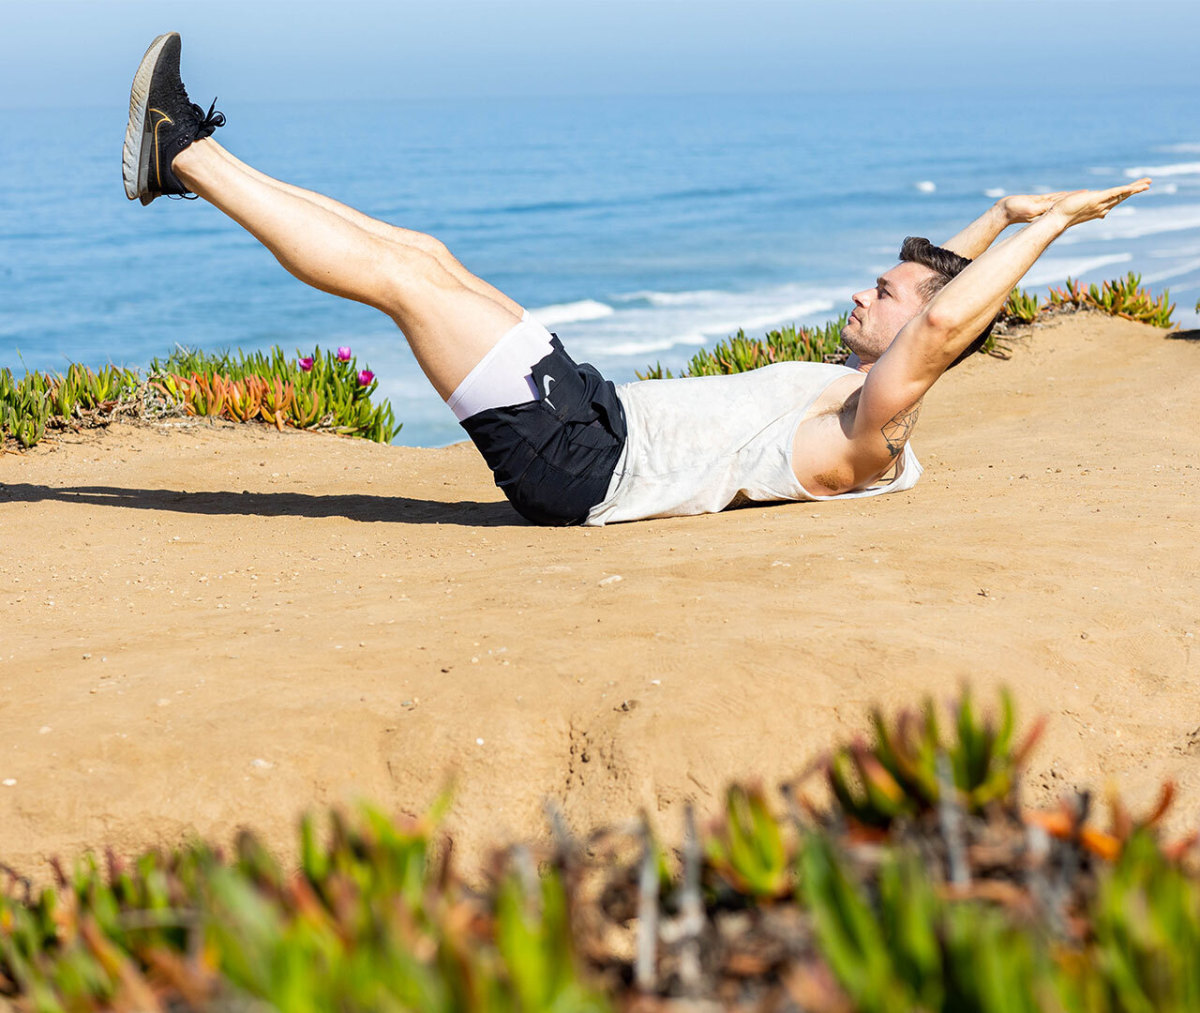 Caucasian man in white tank top and black shorts on back in hollow body hold position with ocean in background